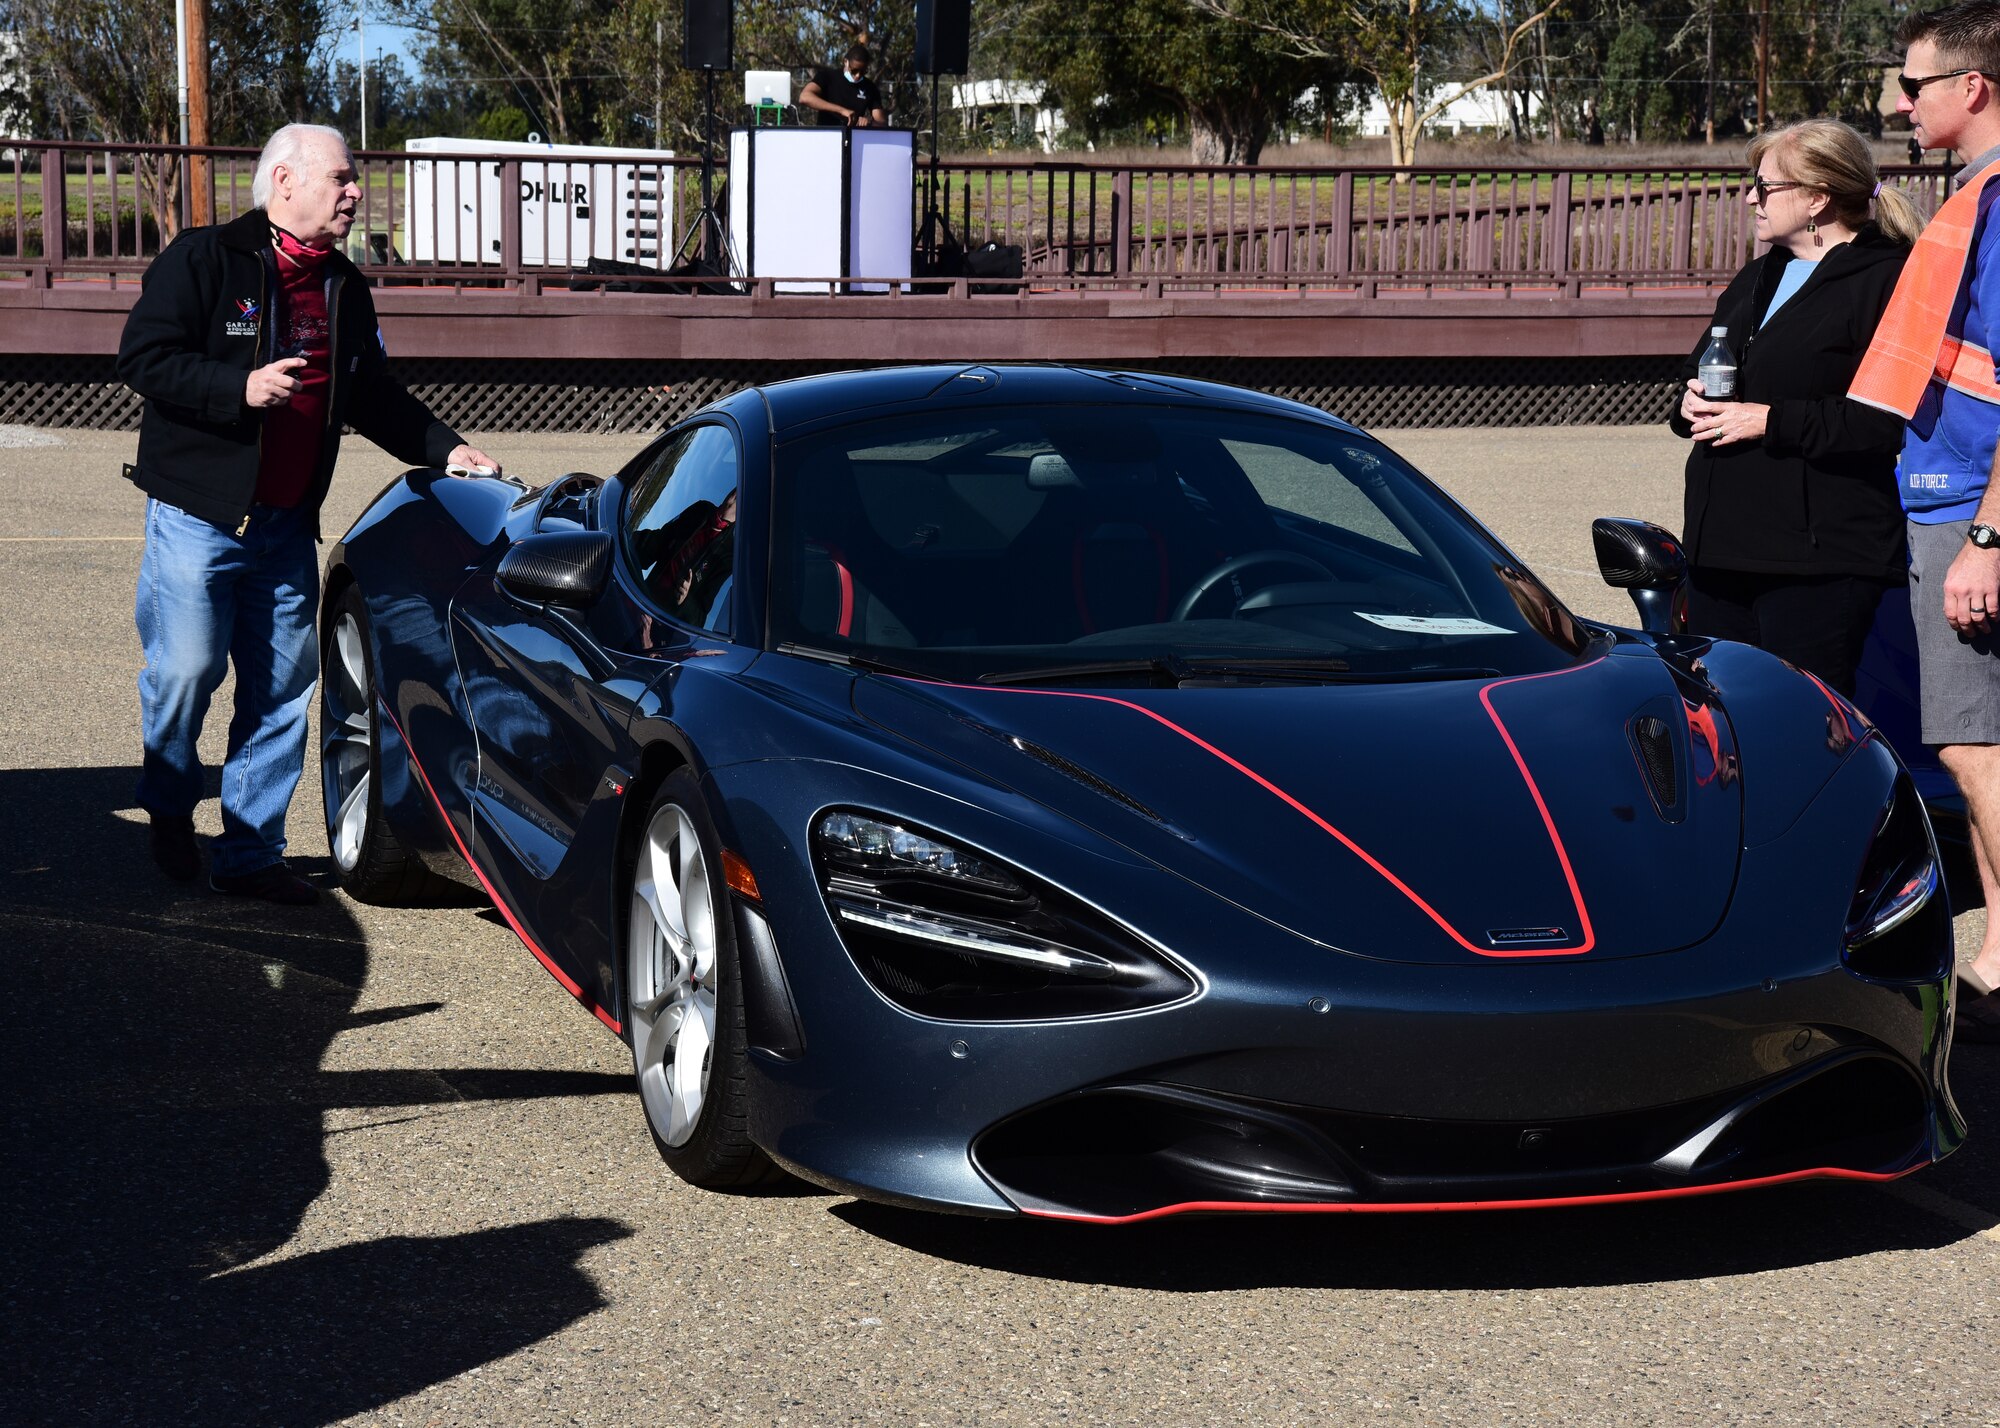 A Mclaren 720S is showcased during Vandenberg’s Ninth Annual Exotic Car Show Oct. 23, 2021, at Vandenberg Space Force Base, Calif. The 30th Force Support Squadron also promotes a culture of success built upon professionalism, diversity, and inclusion. (U.S. Space Force photo by Airman First Class Tiarra Sibley)